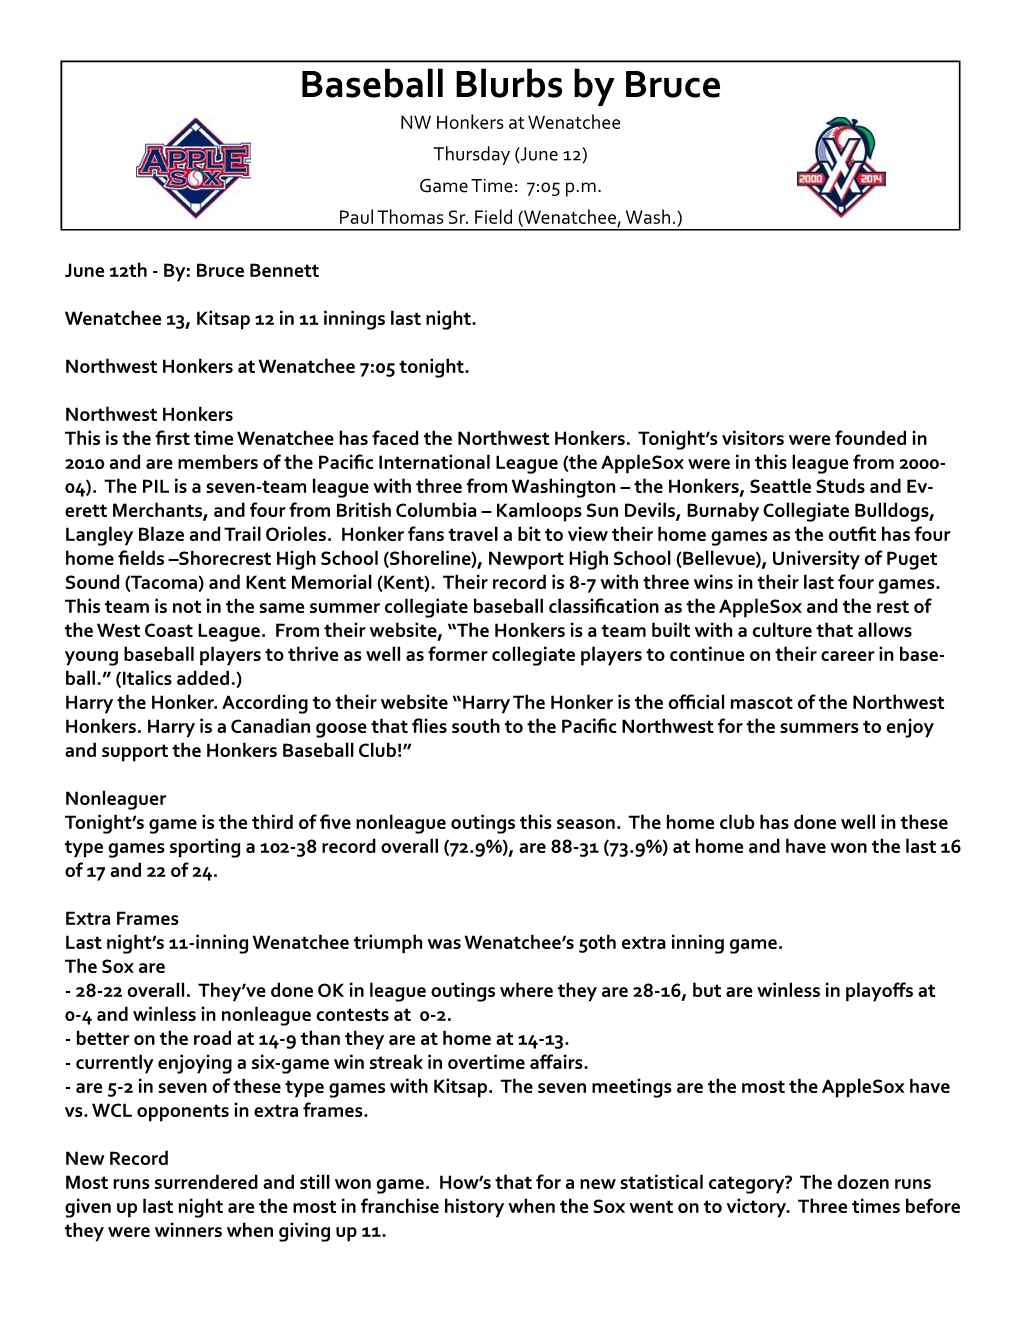 Baseball Blurbs by Bruce NW Honkers at Wenatchee Thursday (June 12) Game Time: 7:05 P.M